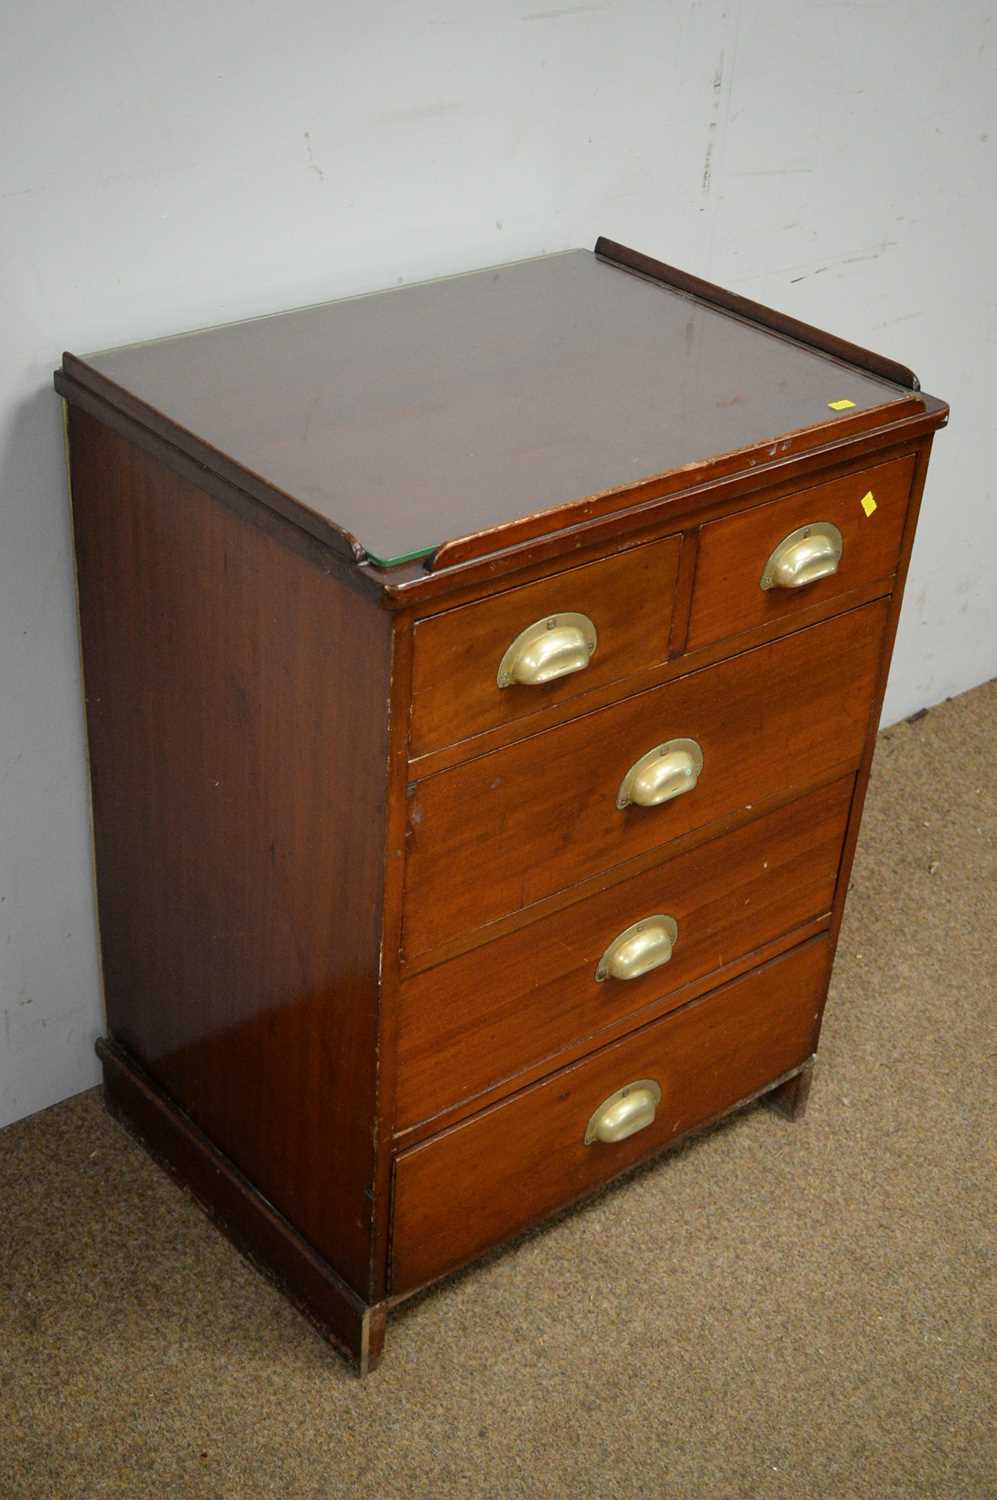 Mahogany chest of drawers with 'patent' handles. - Image 2 of 4